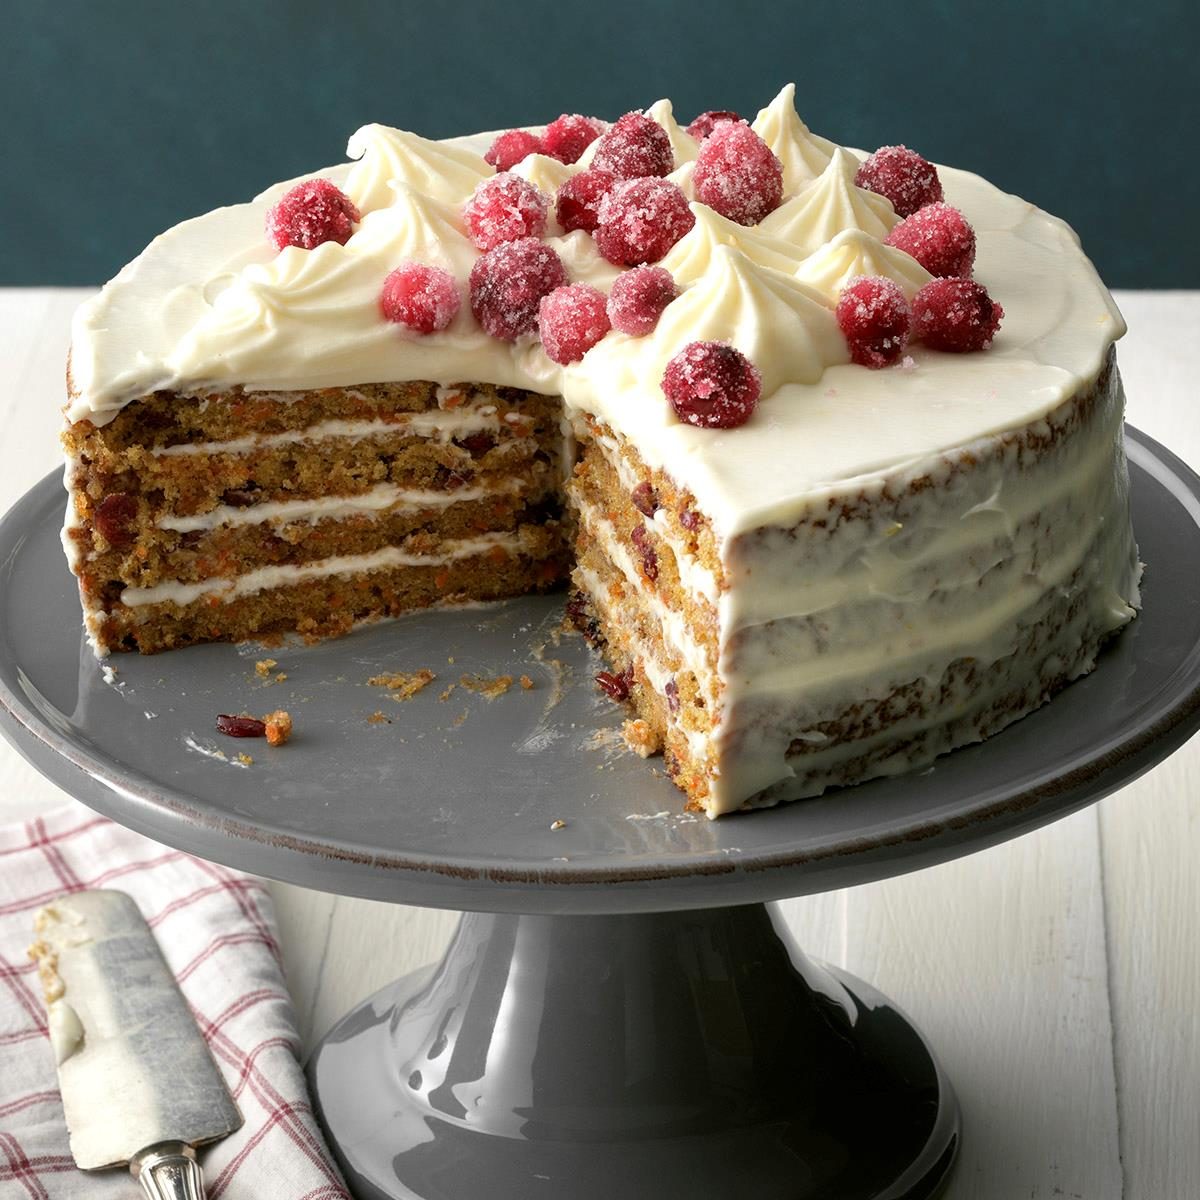 Cranberry-Carrot Layer Cake Recipe: How to Make It